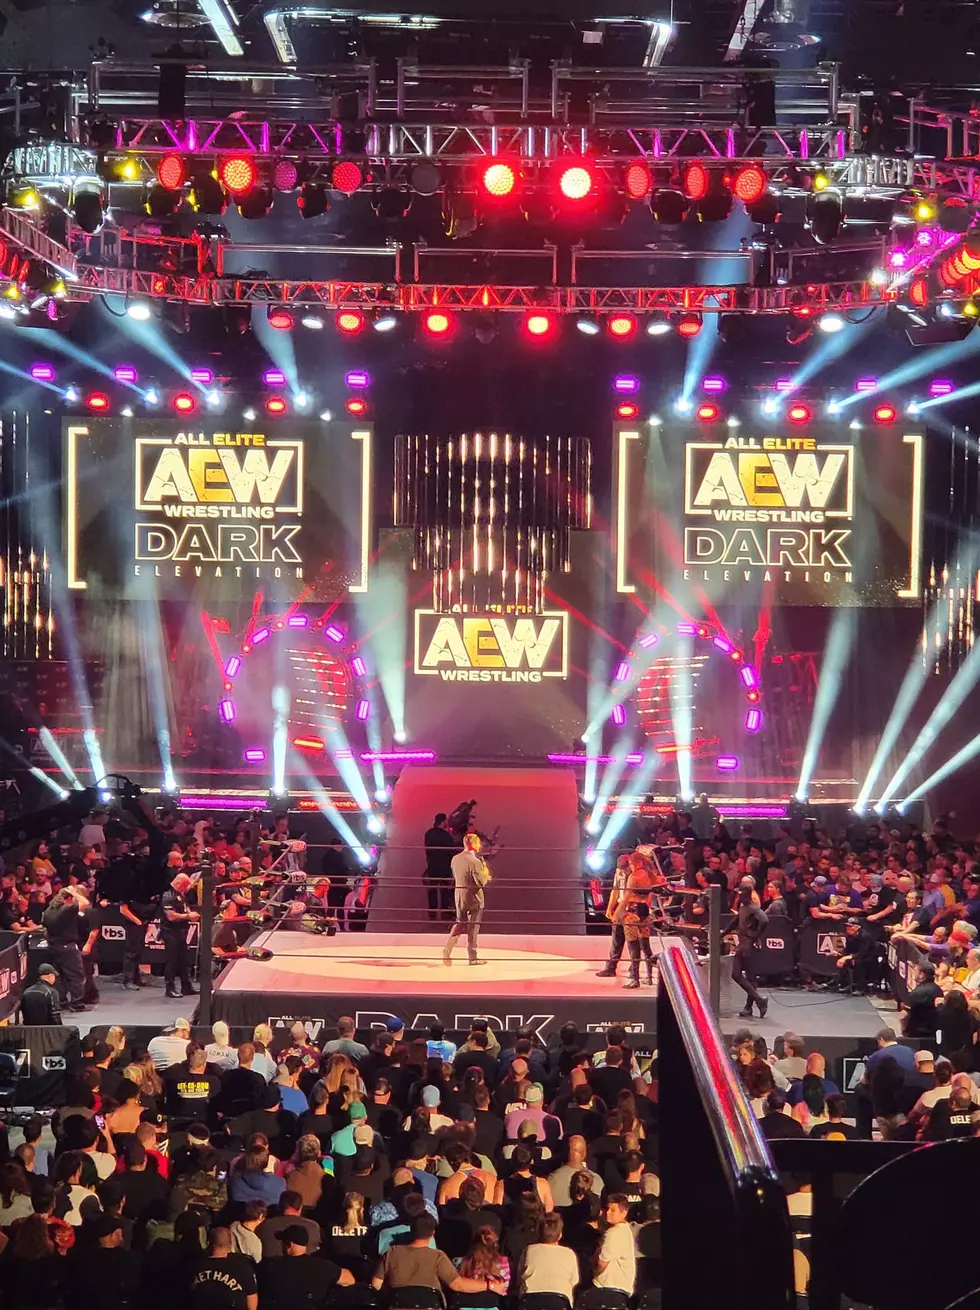 AEW Wrestling Announces Coming to Buffalo, New York